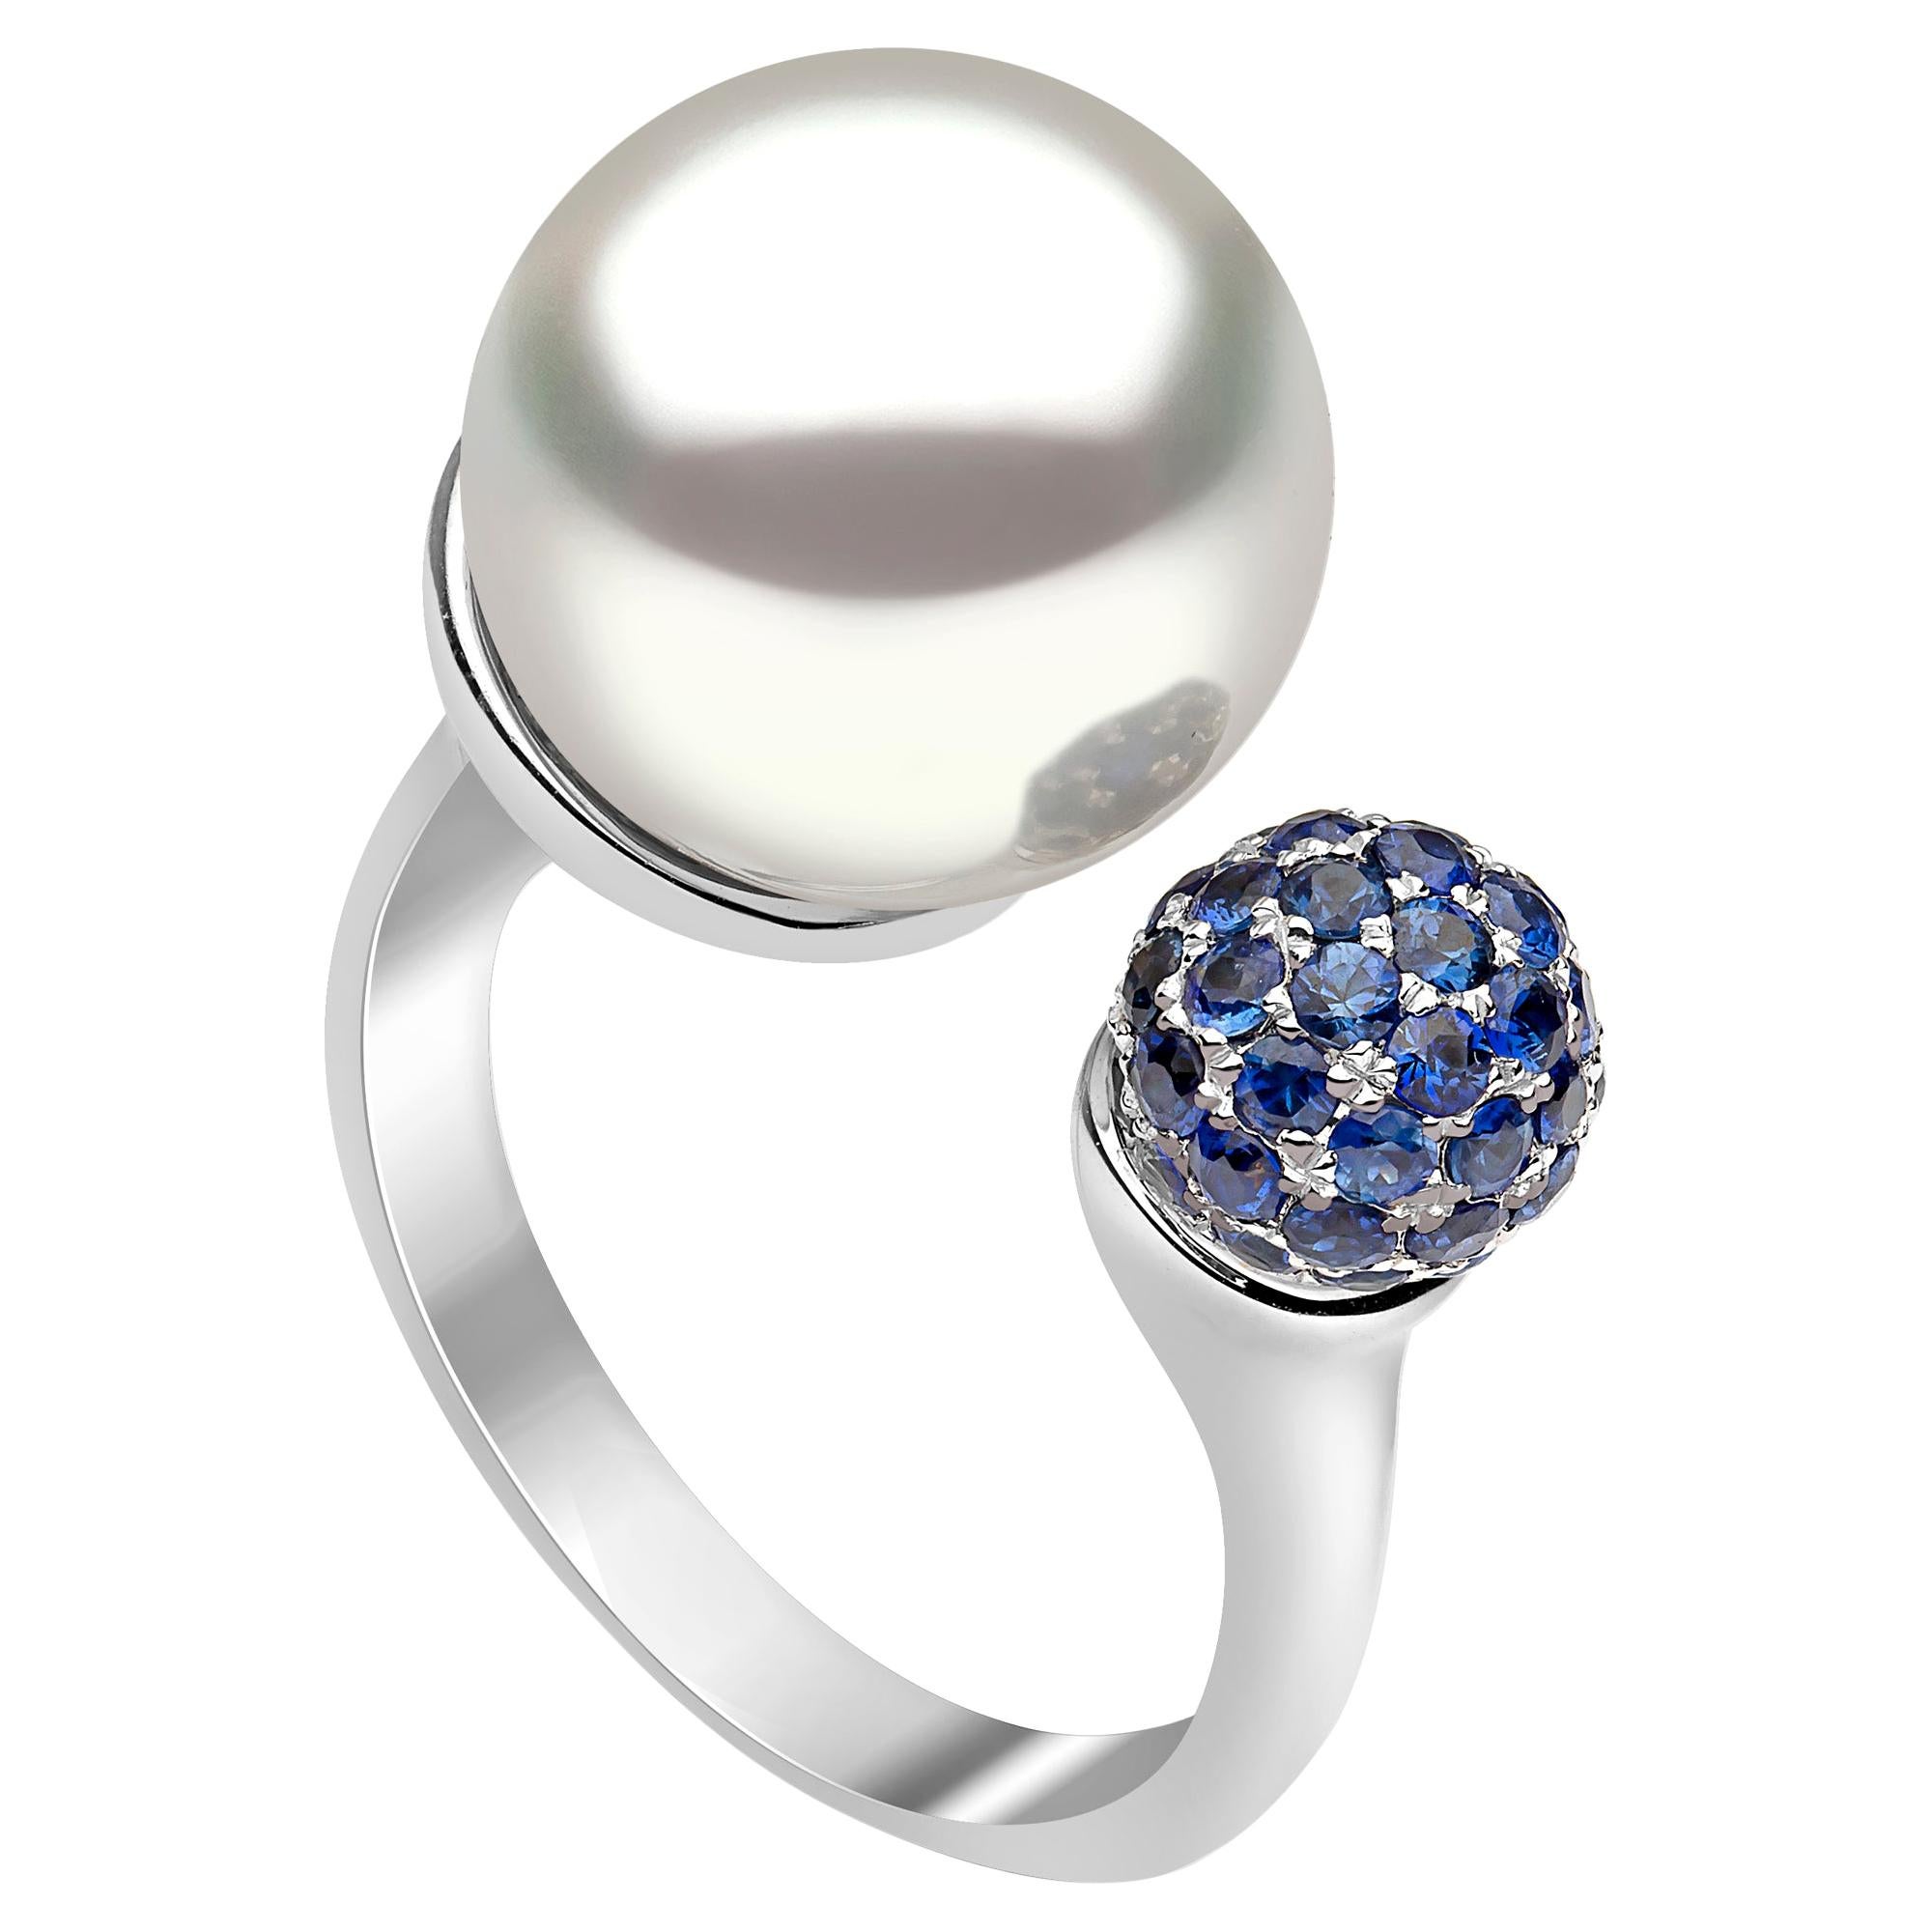 Yoko London Blue Sapphire and South Sea Pearl Ring in 18 Karat White Gold